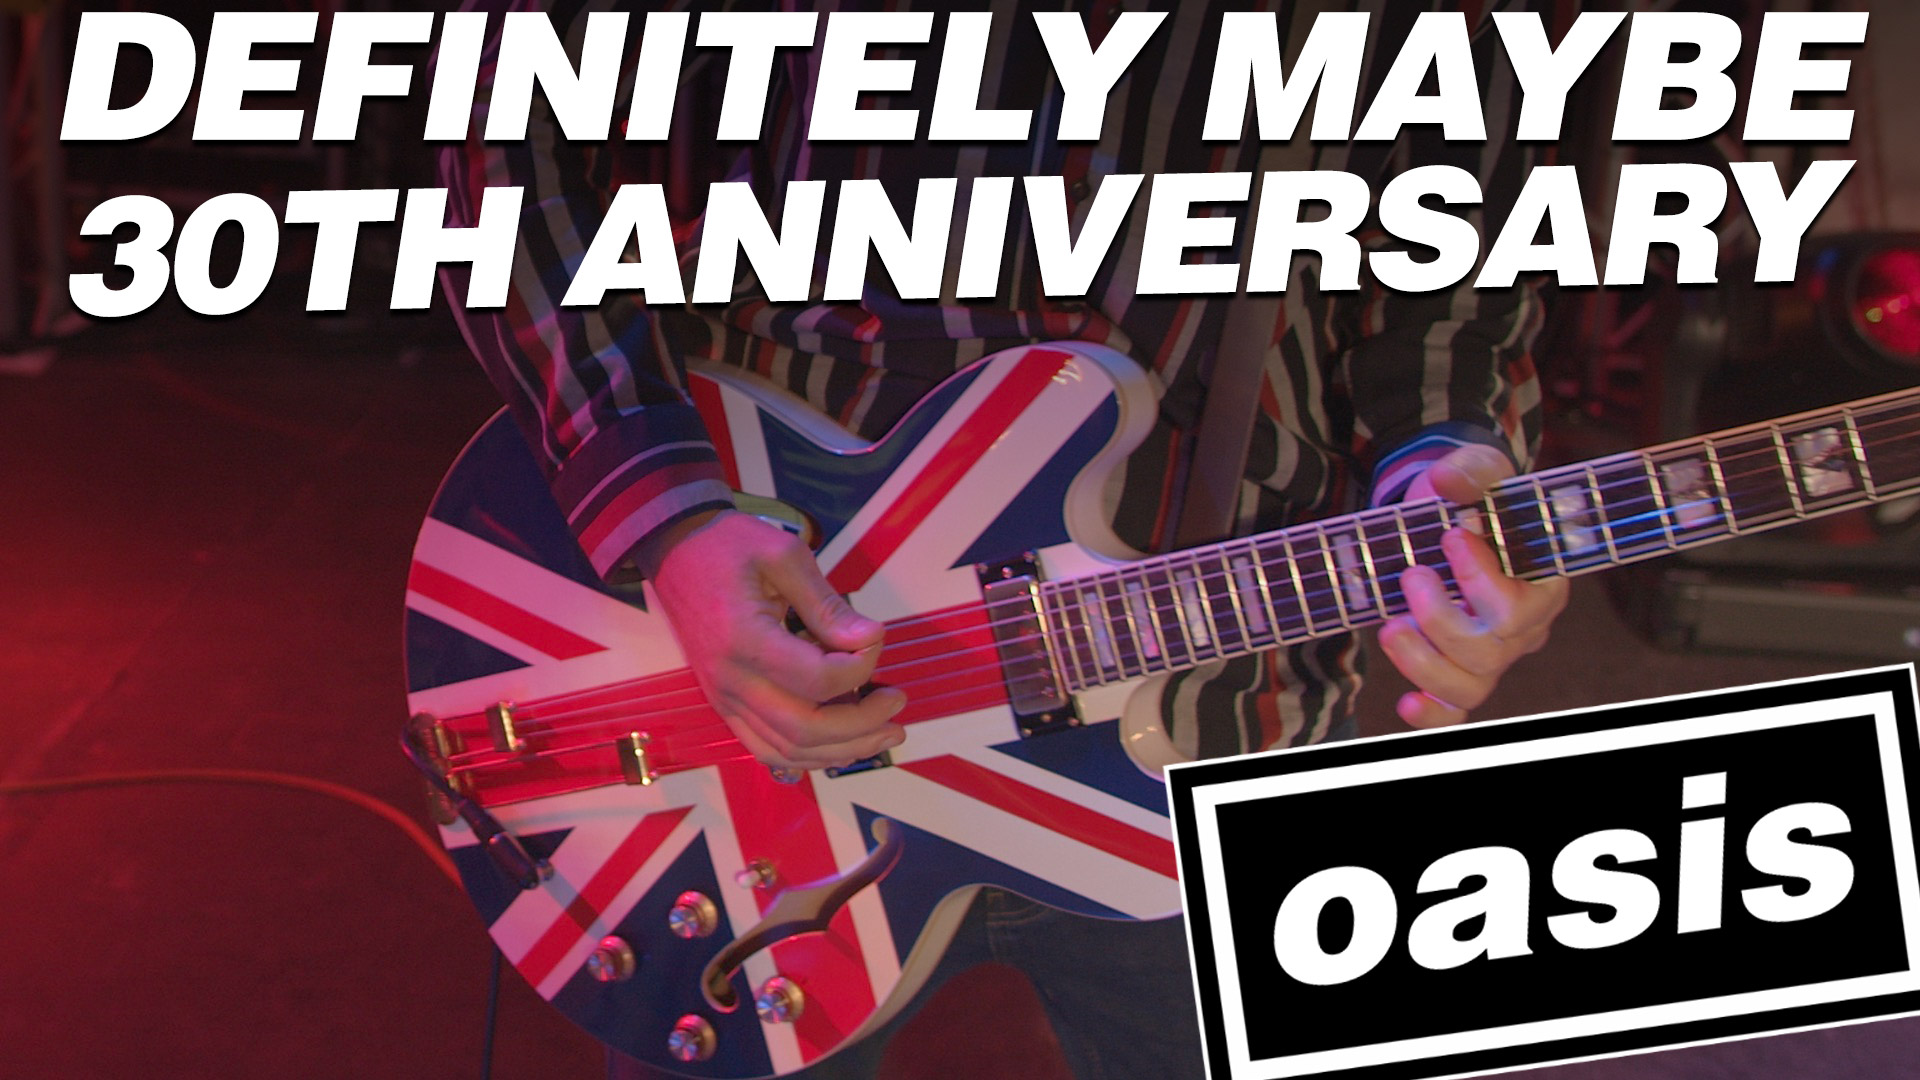 Definitely Maybe by Oasis 30th Anniversary